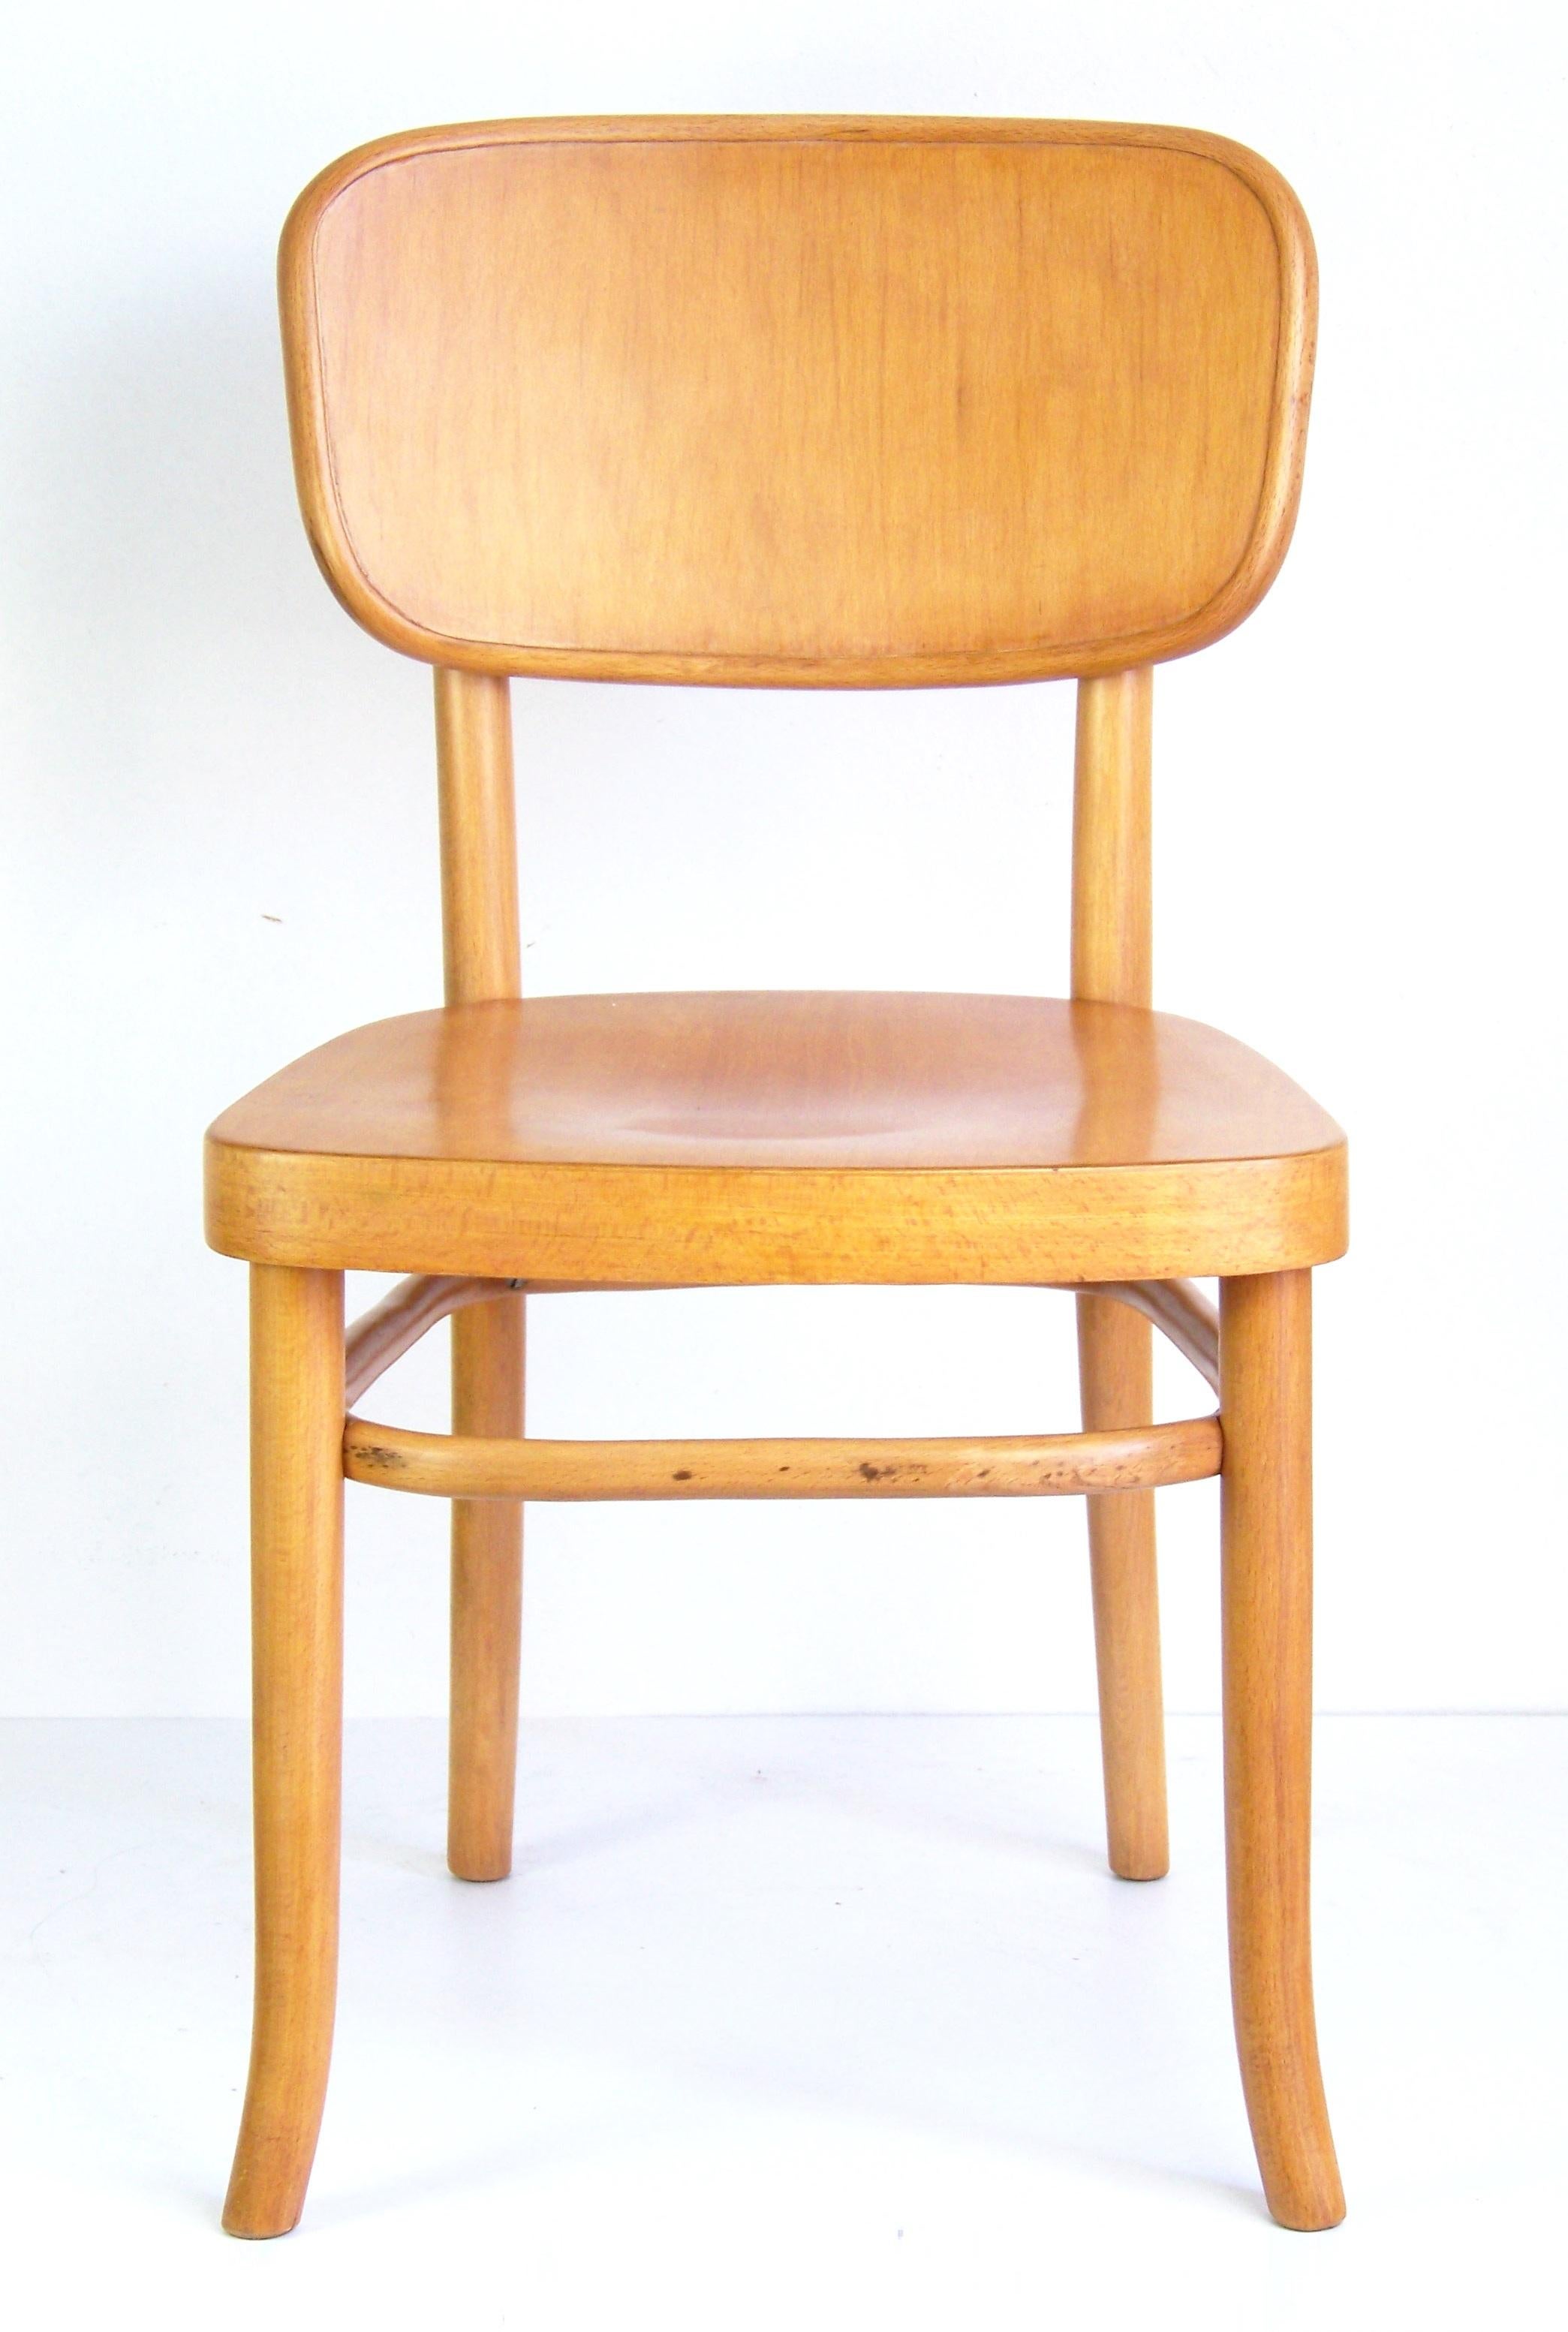 Manufactured in Czechoslovakia by the Thonet-Mundus. Designed in year 1928 by prof. Gustav Adolf Schneck. Bent beechwood. New shellac finish.